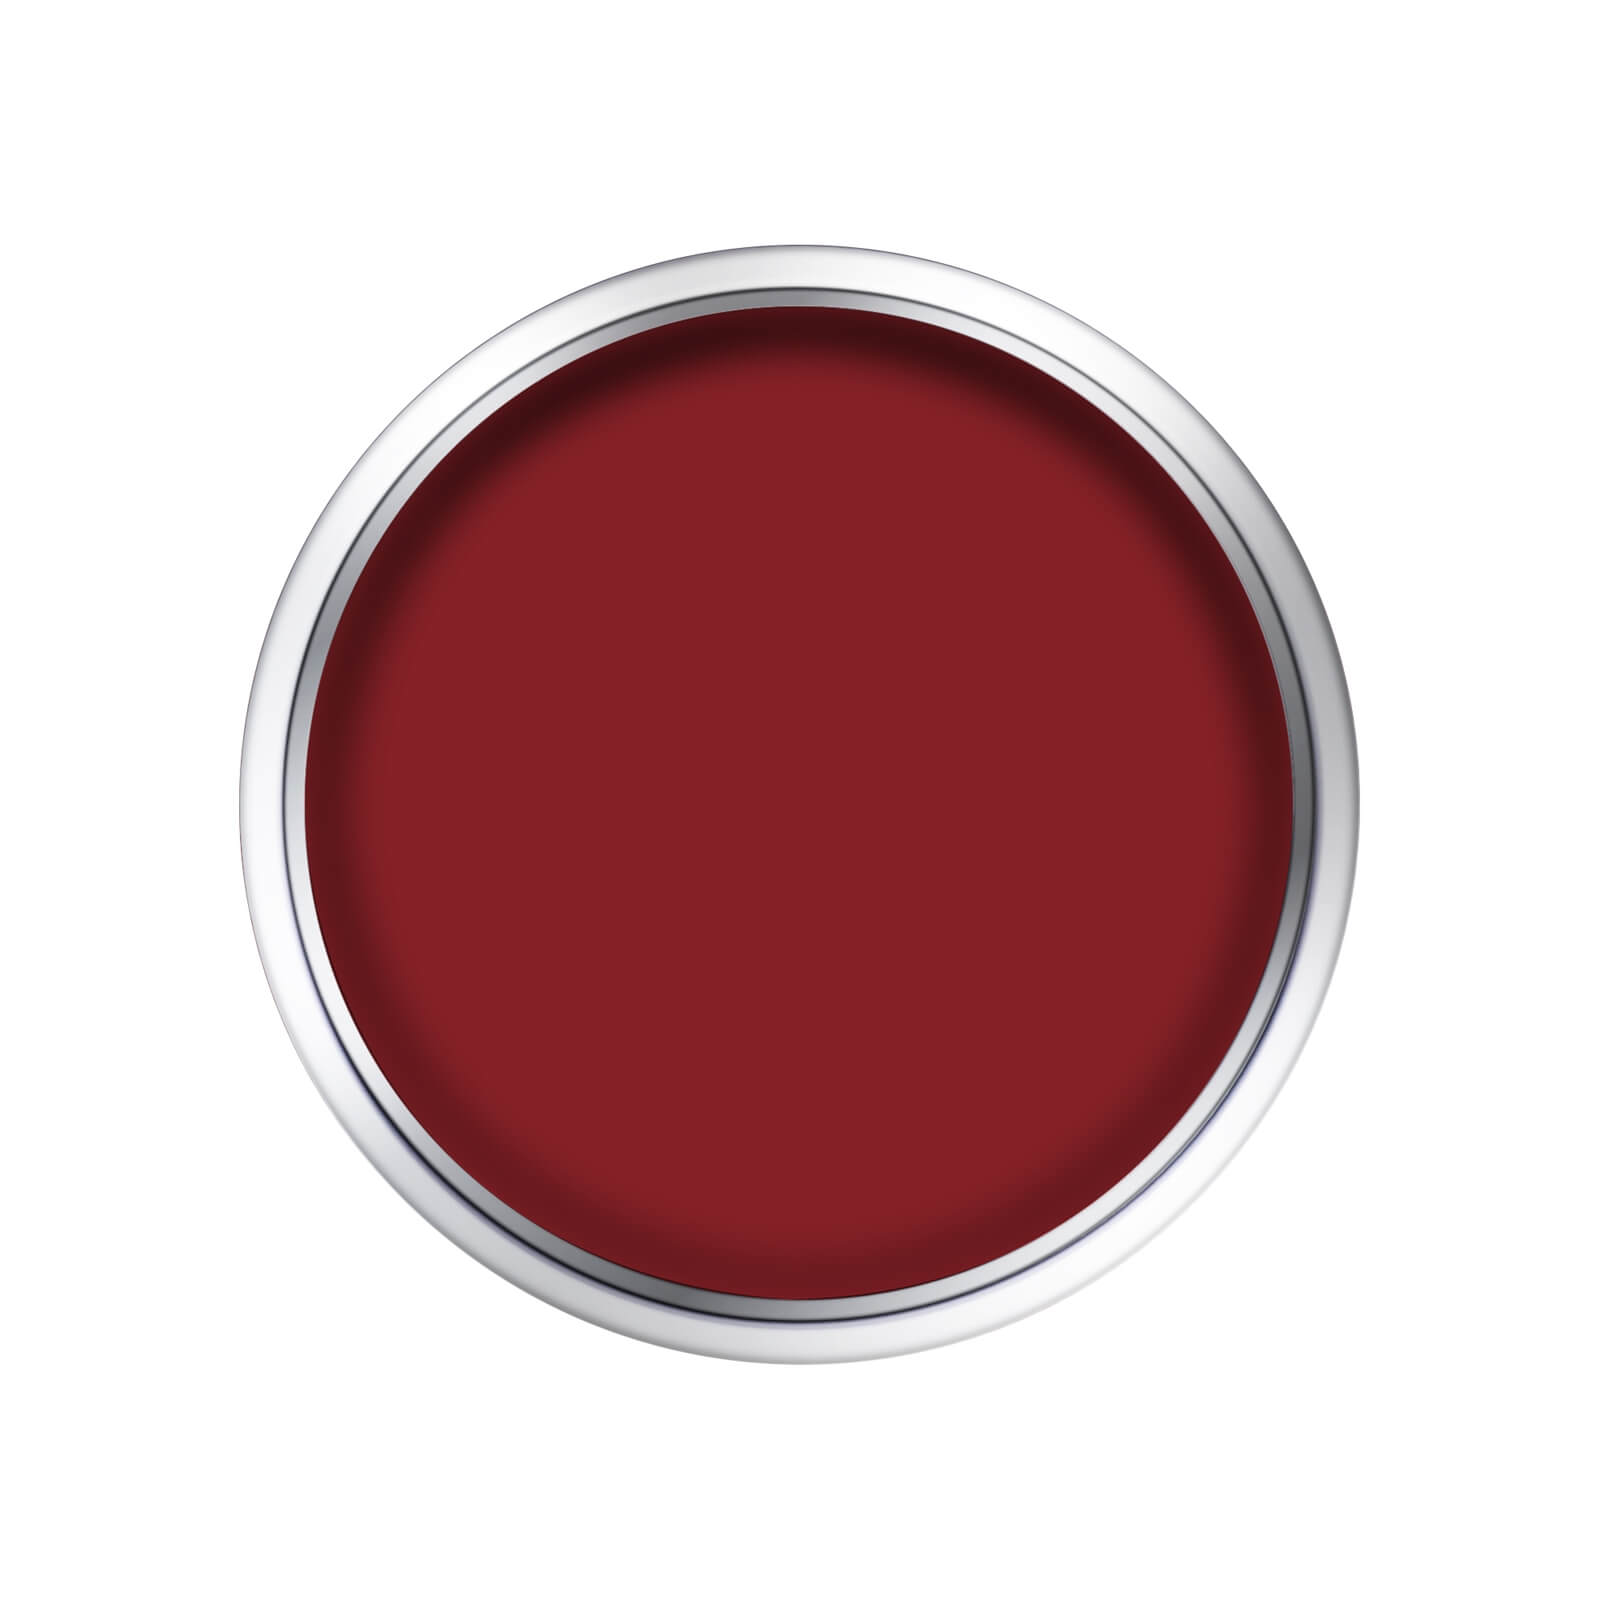 Hammerite Ultima Smooth Metal Paint Ruby Red - 750ml